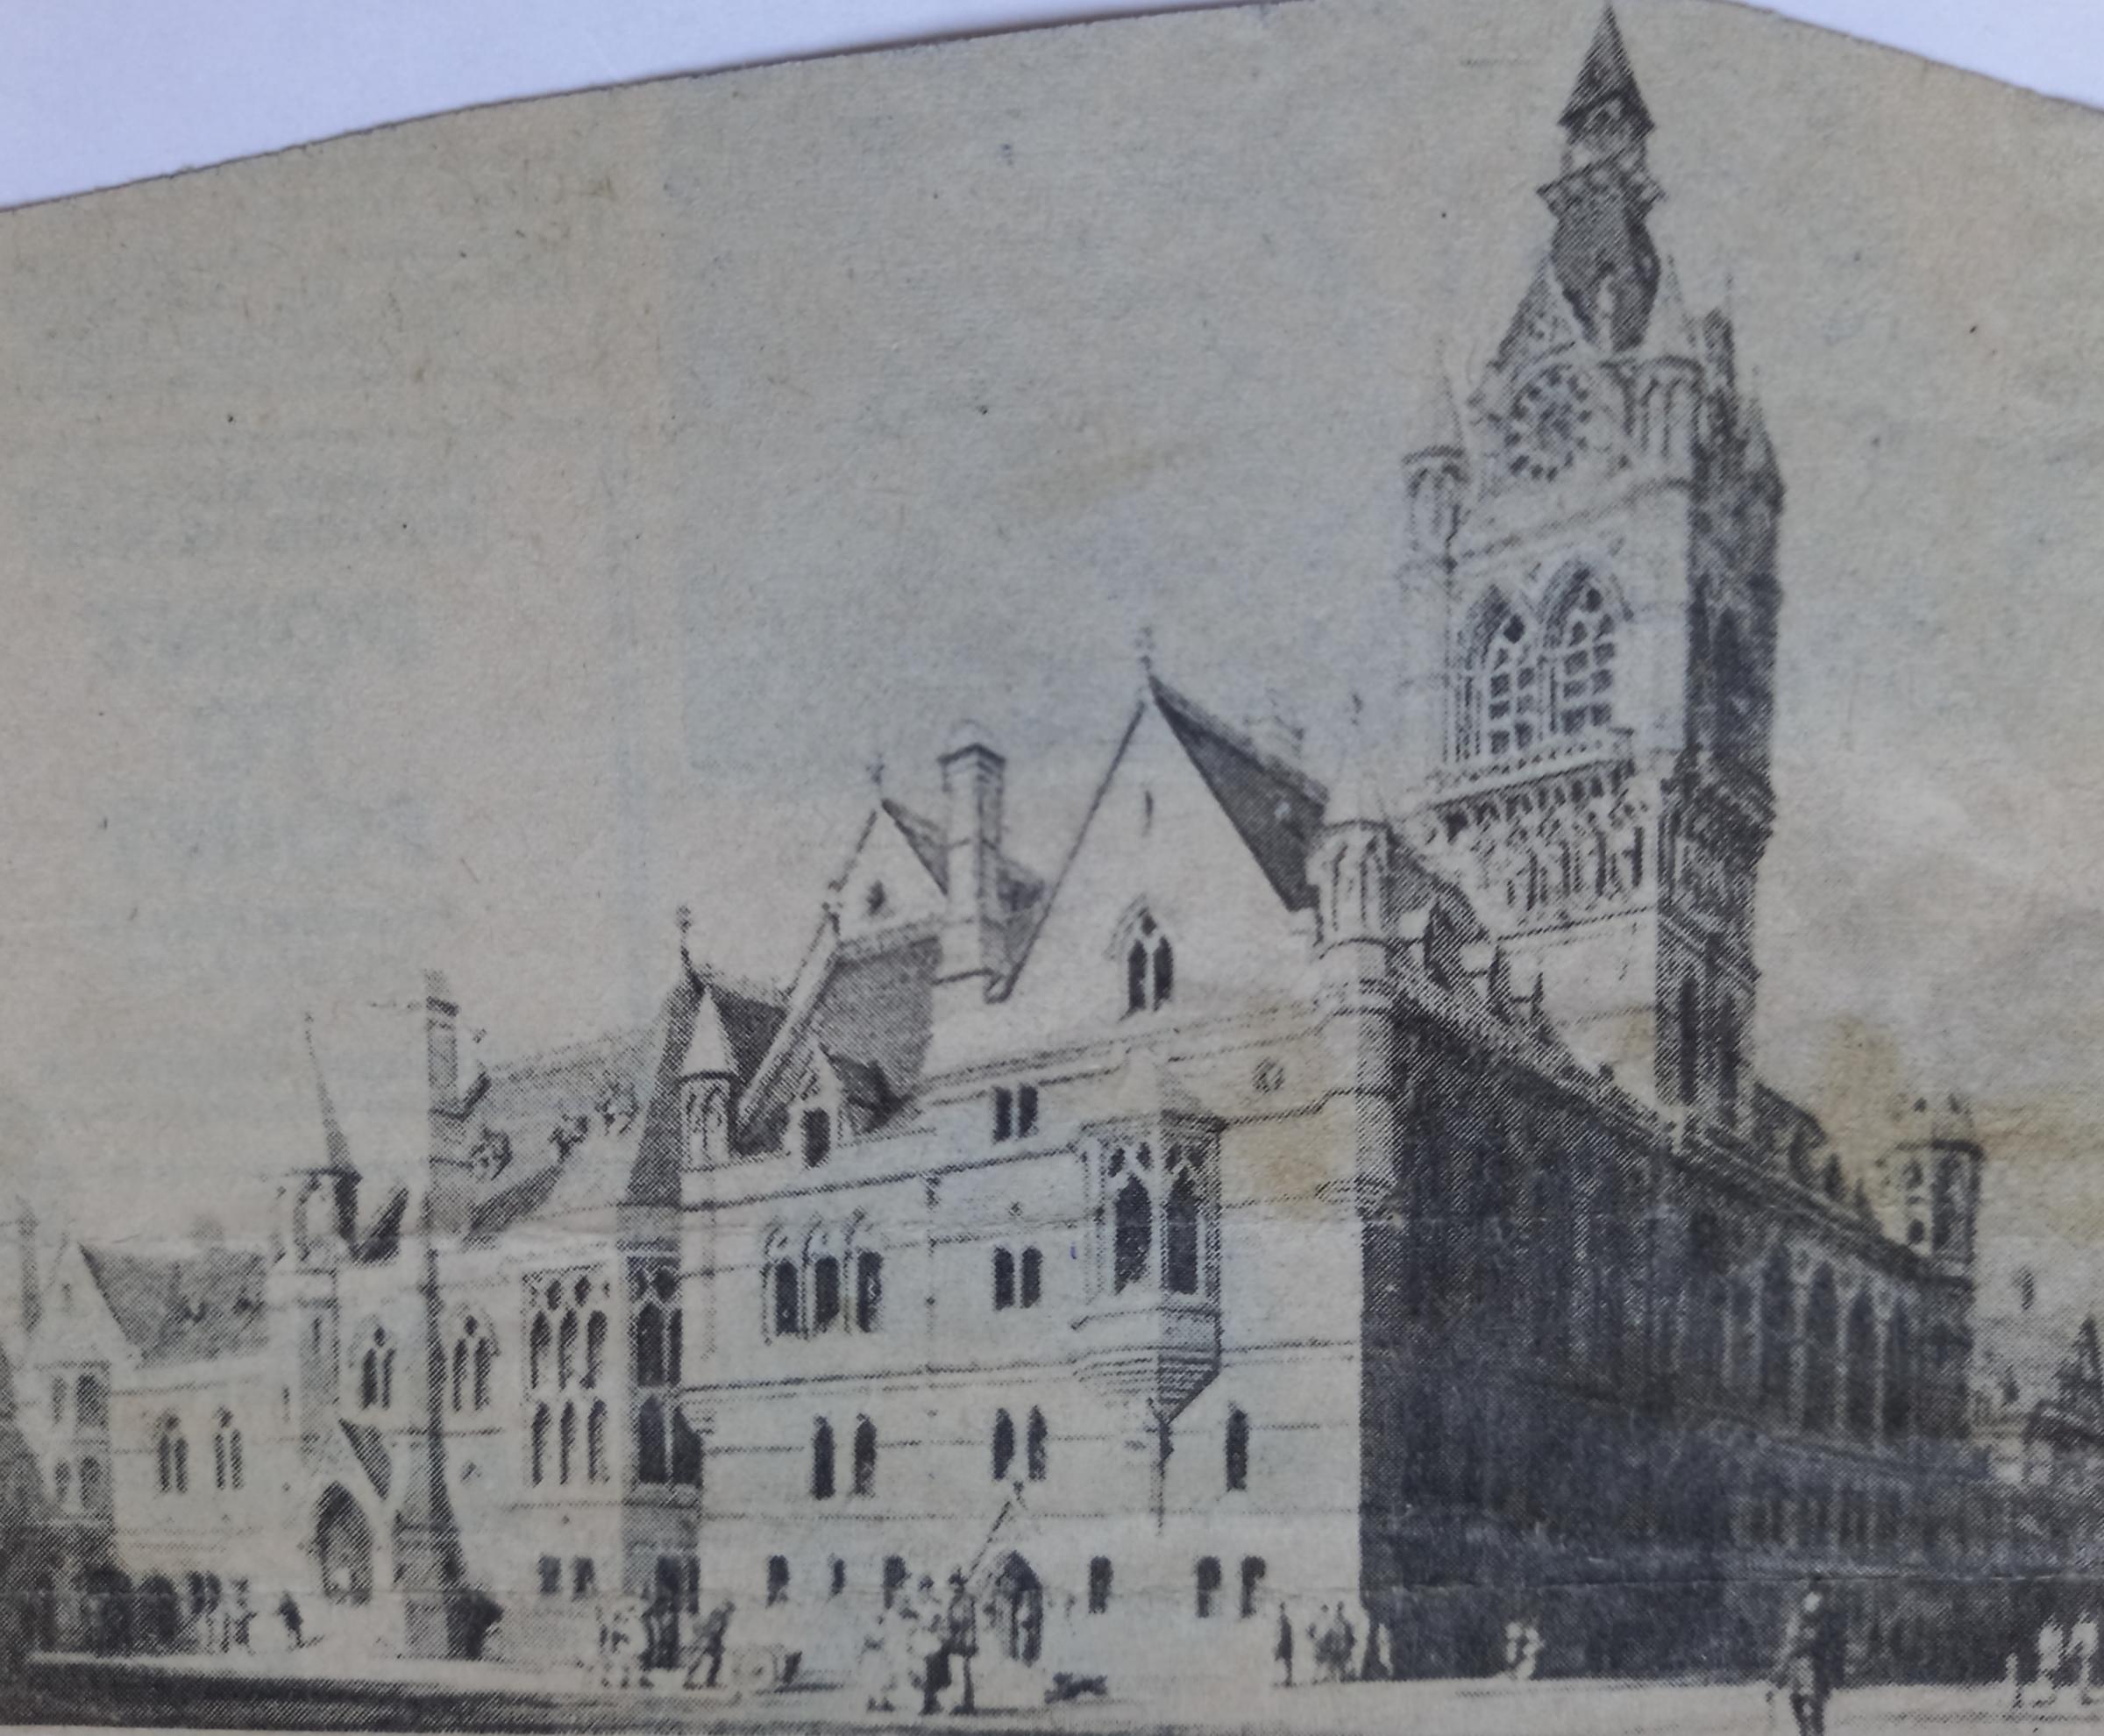  This was another entry in the 1872 competition by national architect Alfred Waterhouse